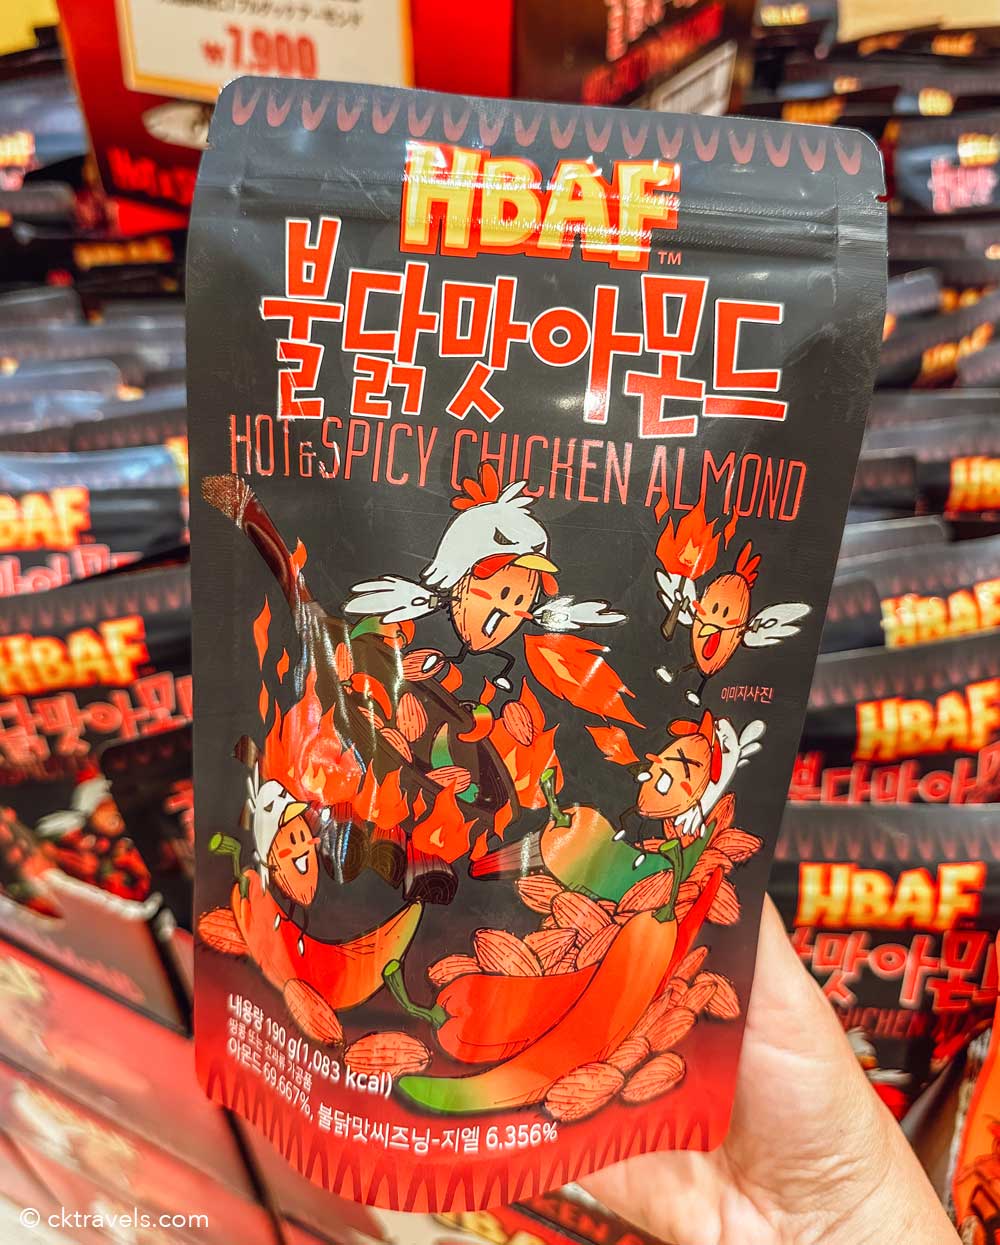 HBAF hot and spicy chicken Almonds south korea